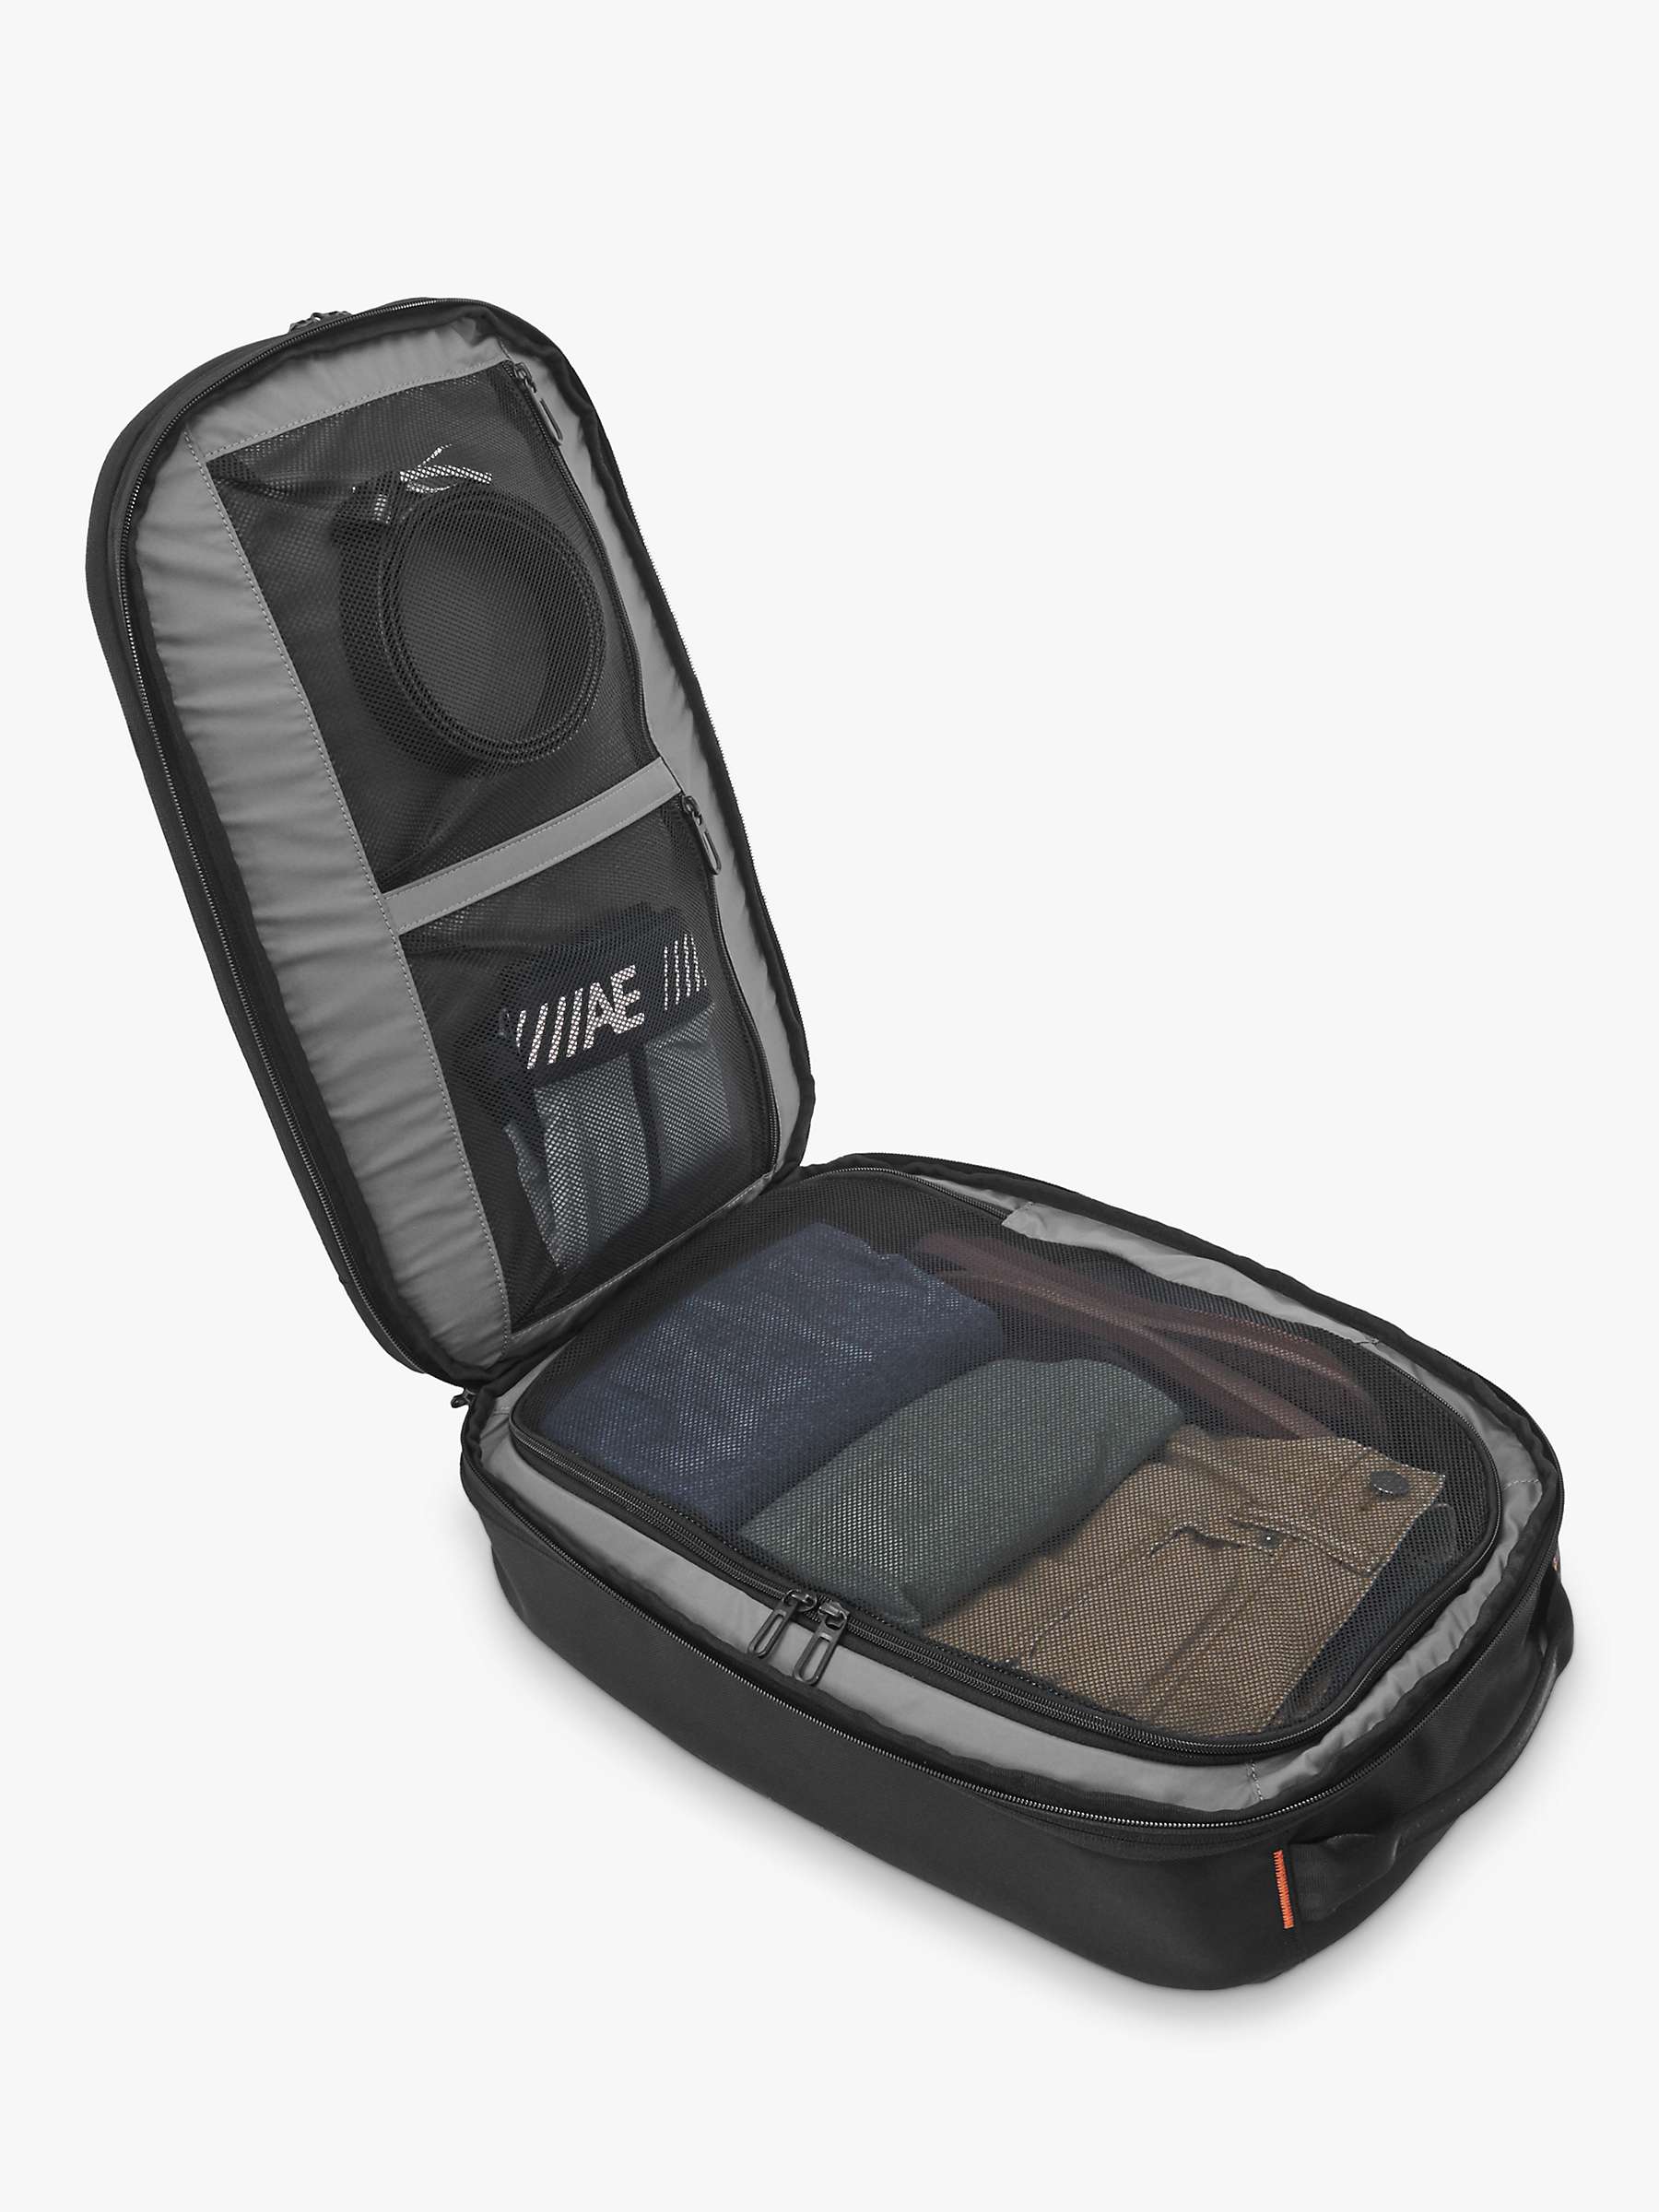 Buy Briggs & Riley ZDX Convertible Duffle Backpack Online at johnlewis.com